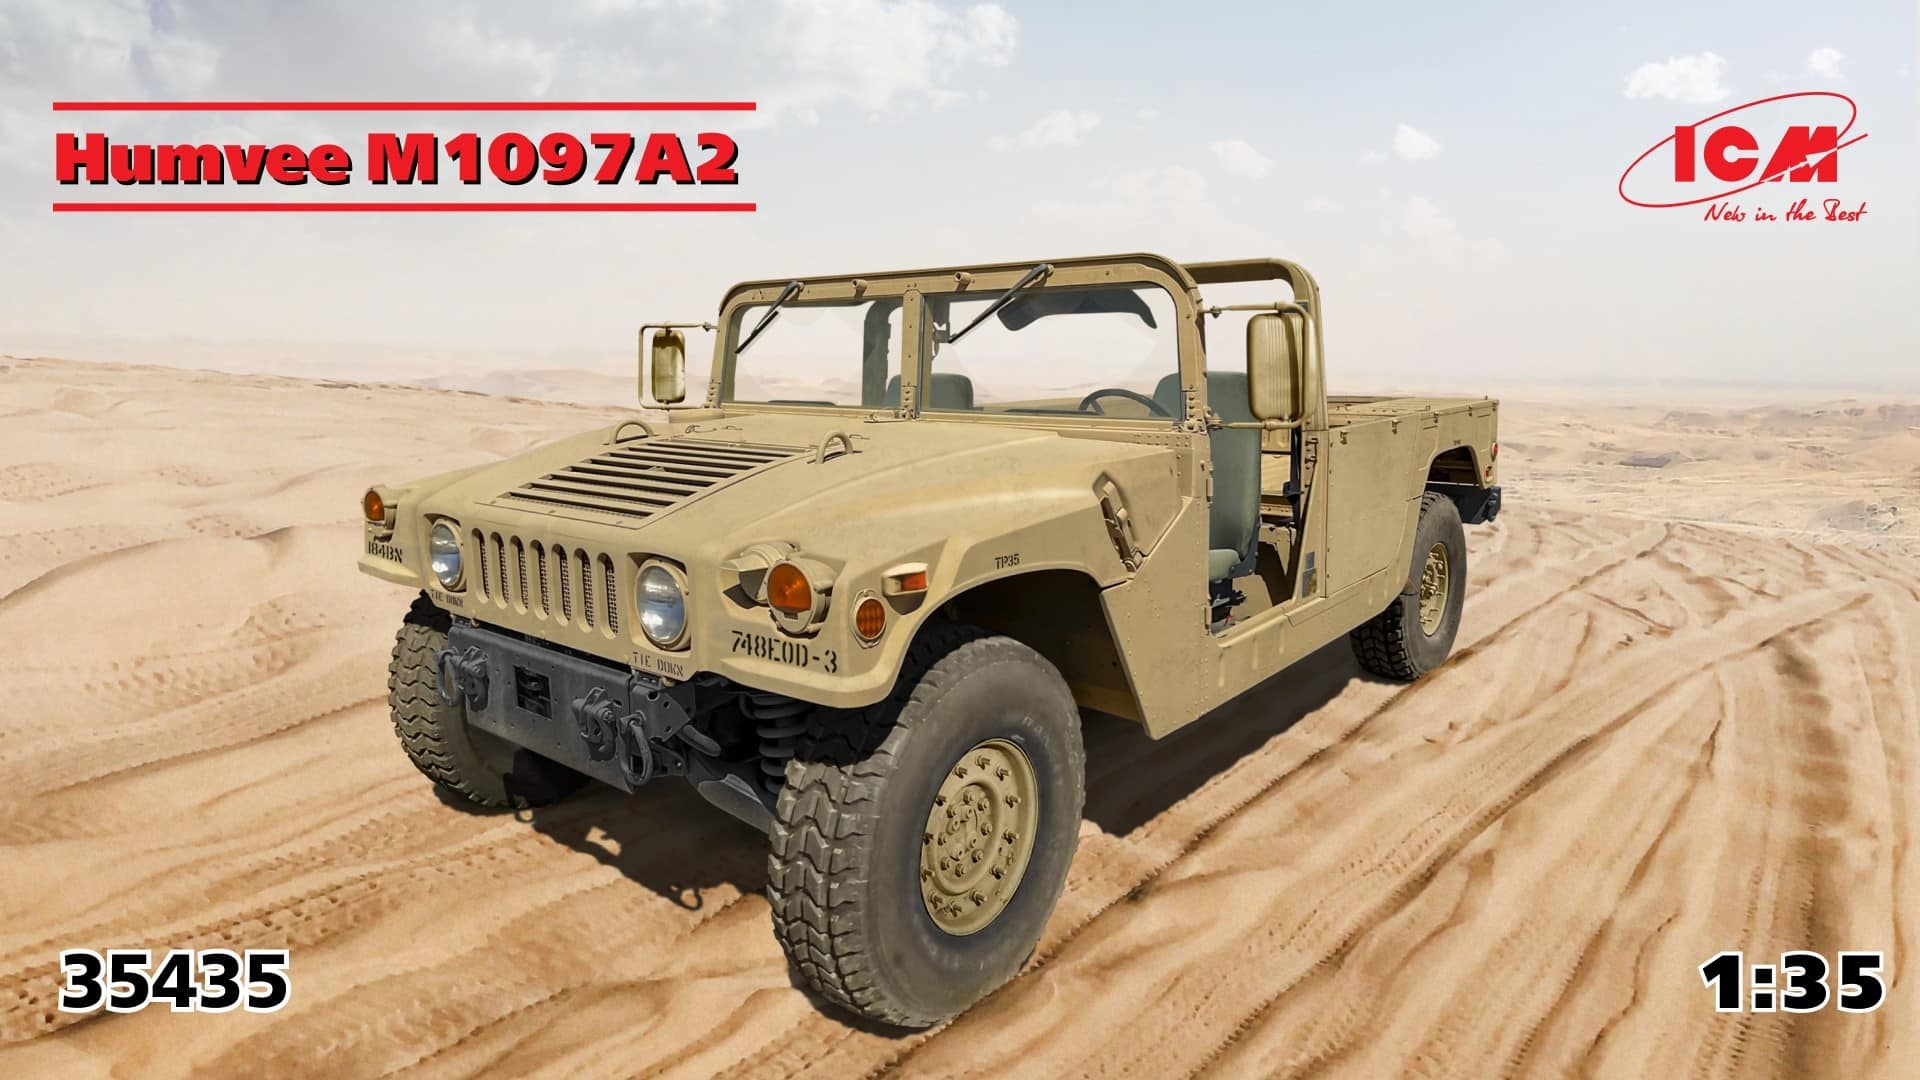 The Humvee M1097A2 will be available for sale in June 2024!